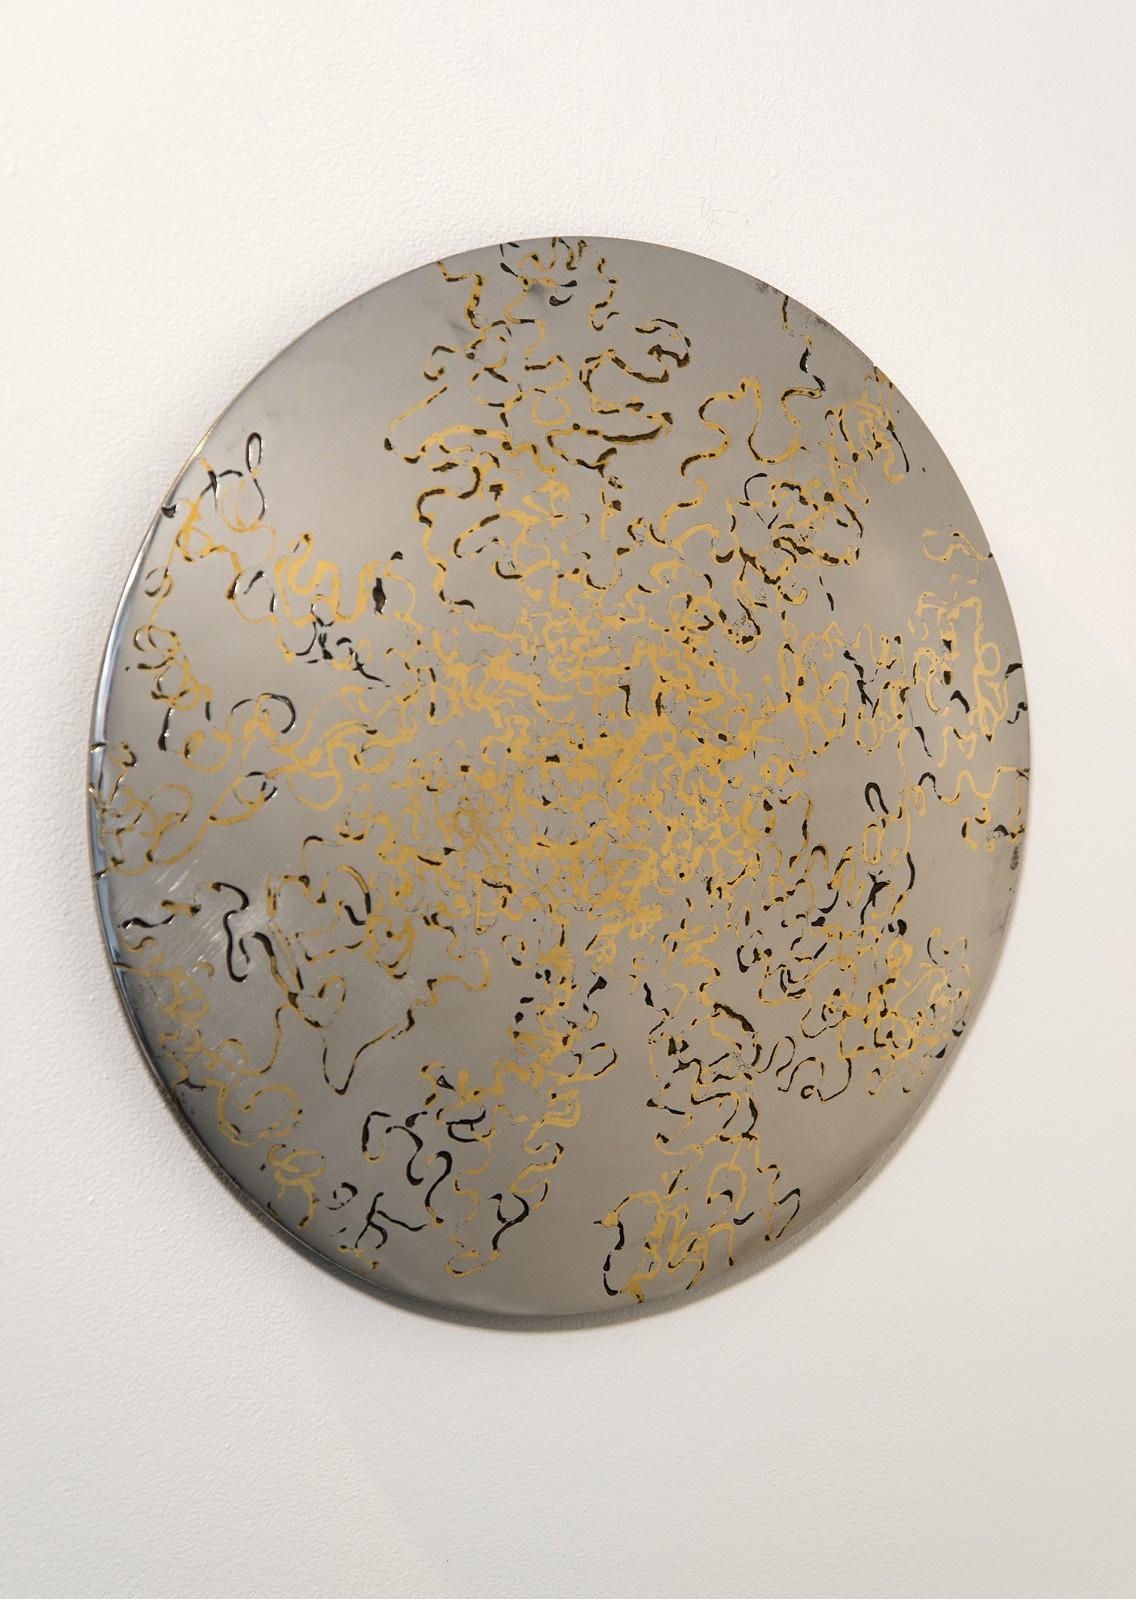 A jewel like surface of polished steel and bronze inlay reflects ambient light in this tondo by Shayne Dark. The pattern cut into the steel surface was sprayed with molten bronze to create the intricate inlay. The artist then buffed the surface back